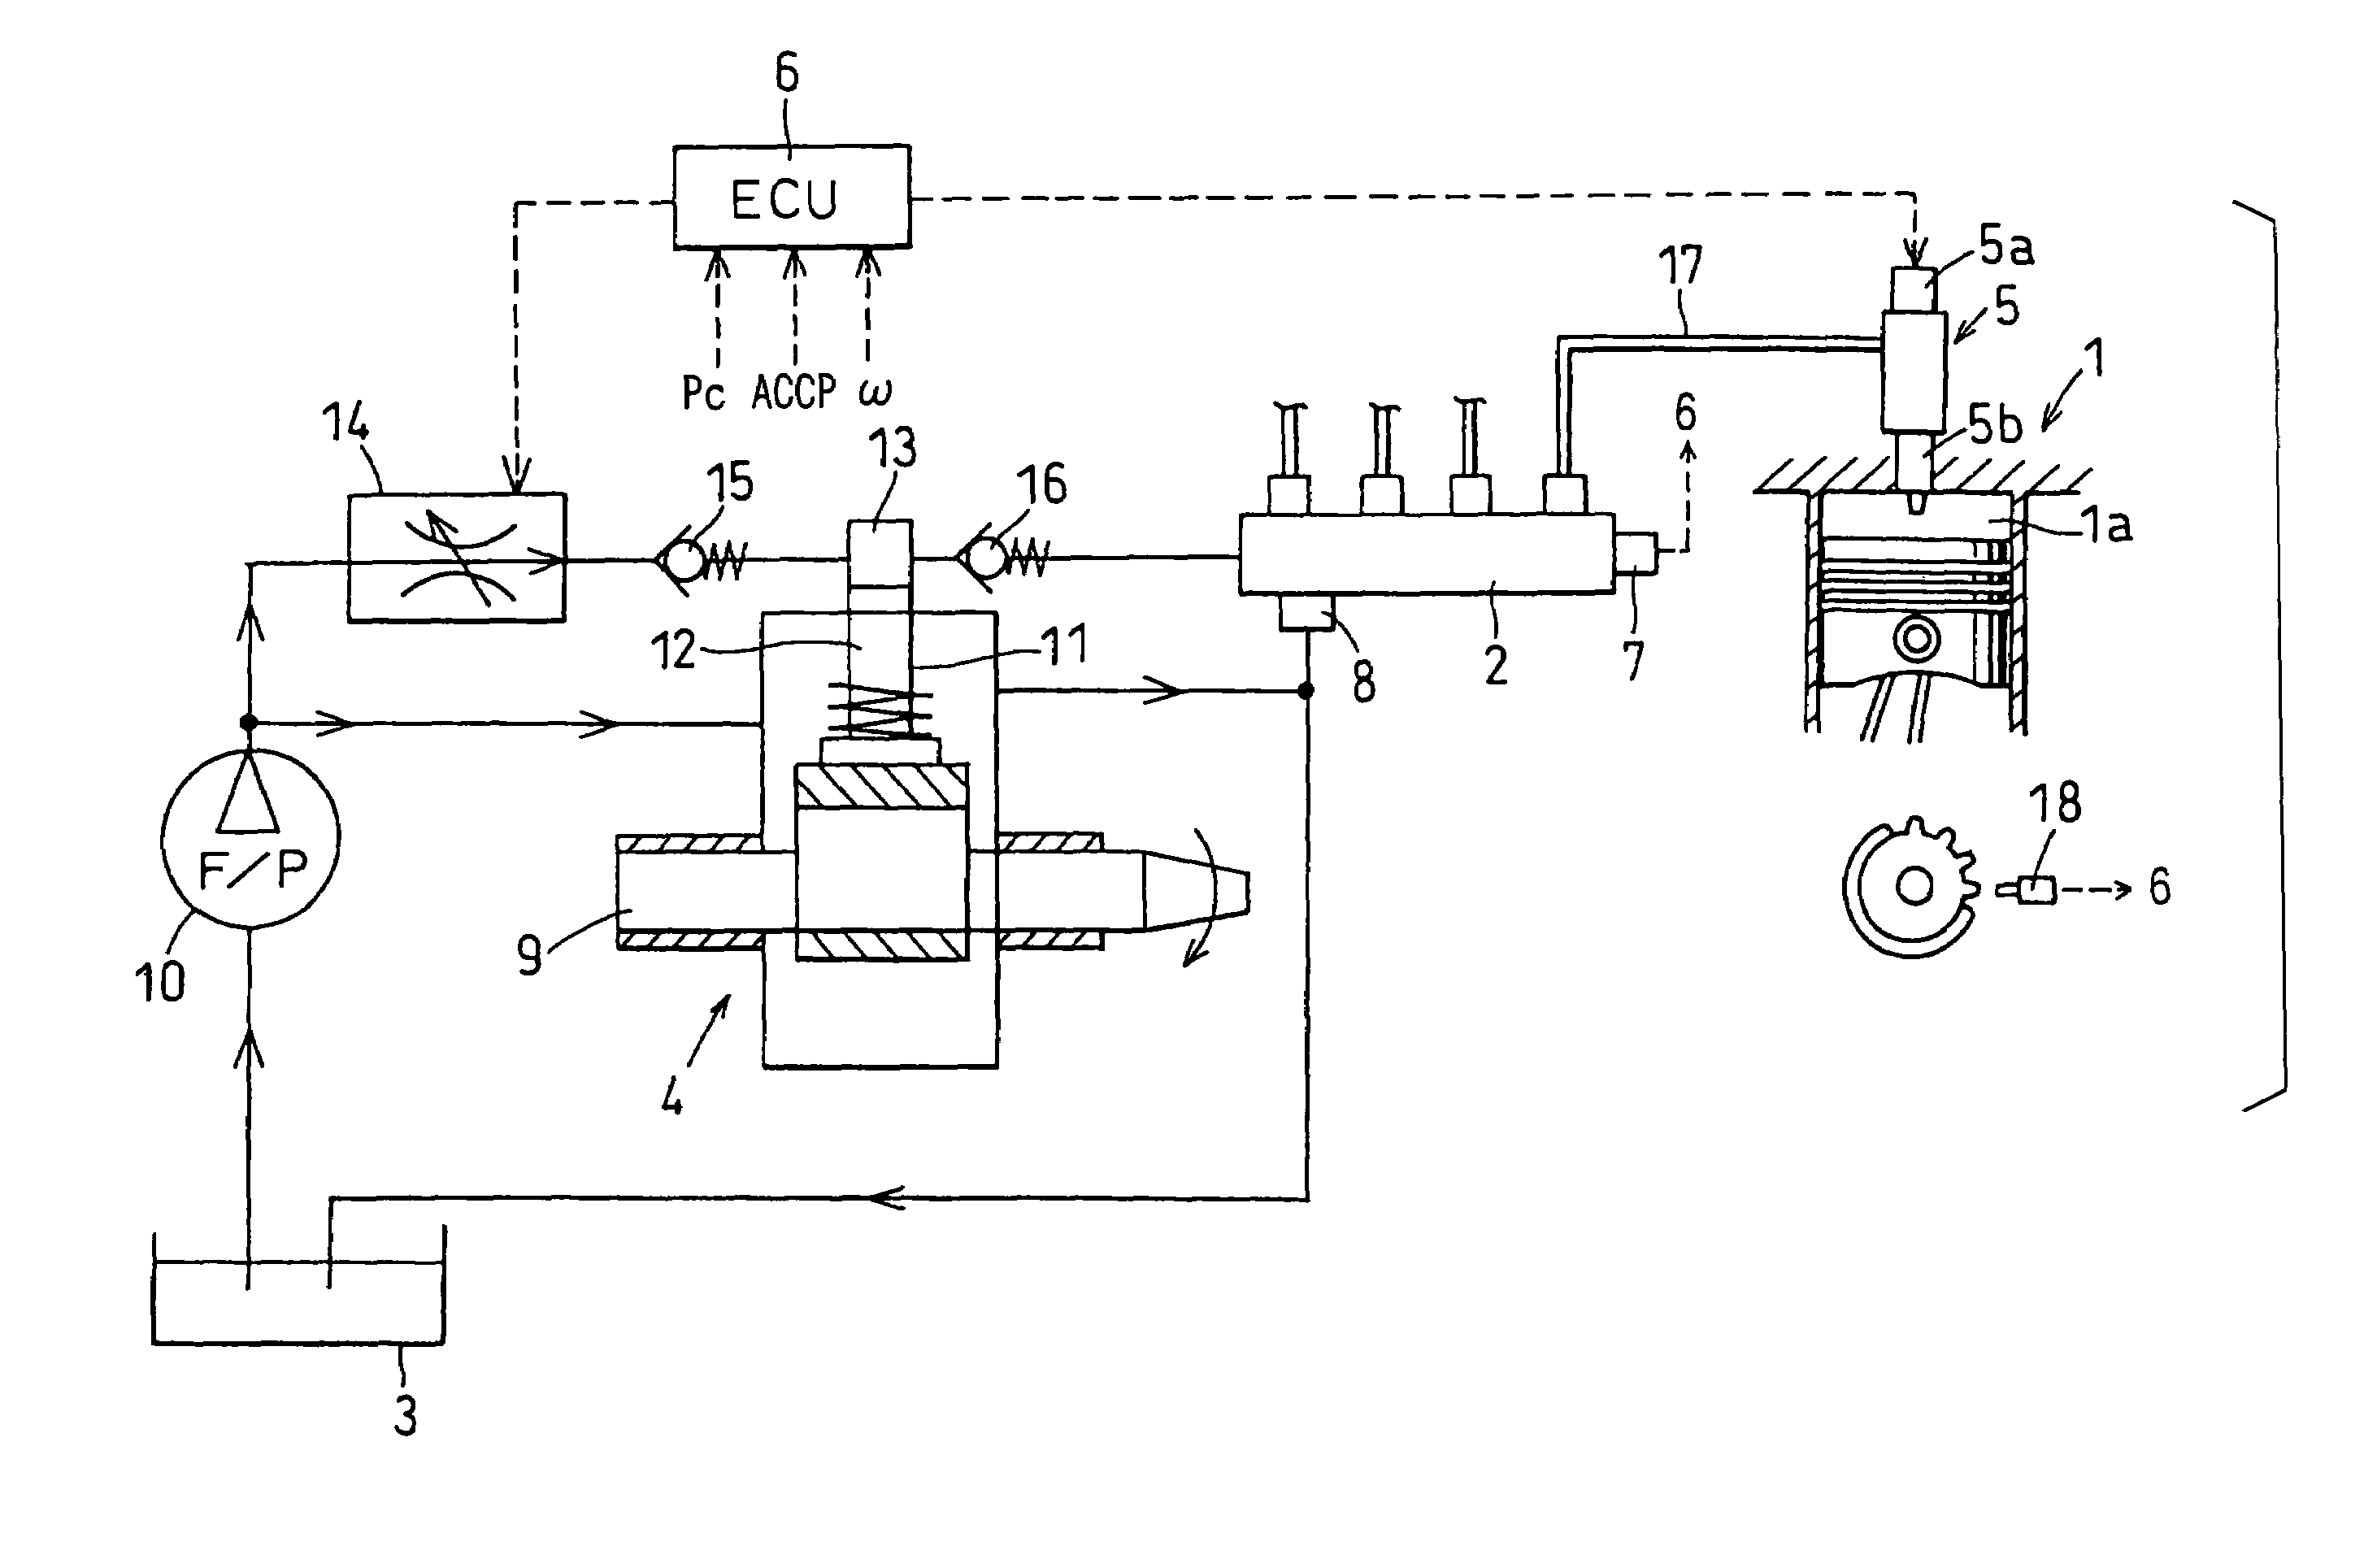 Injection control system of diesel engine